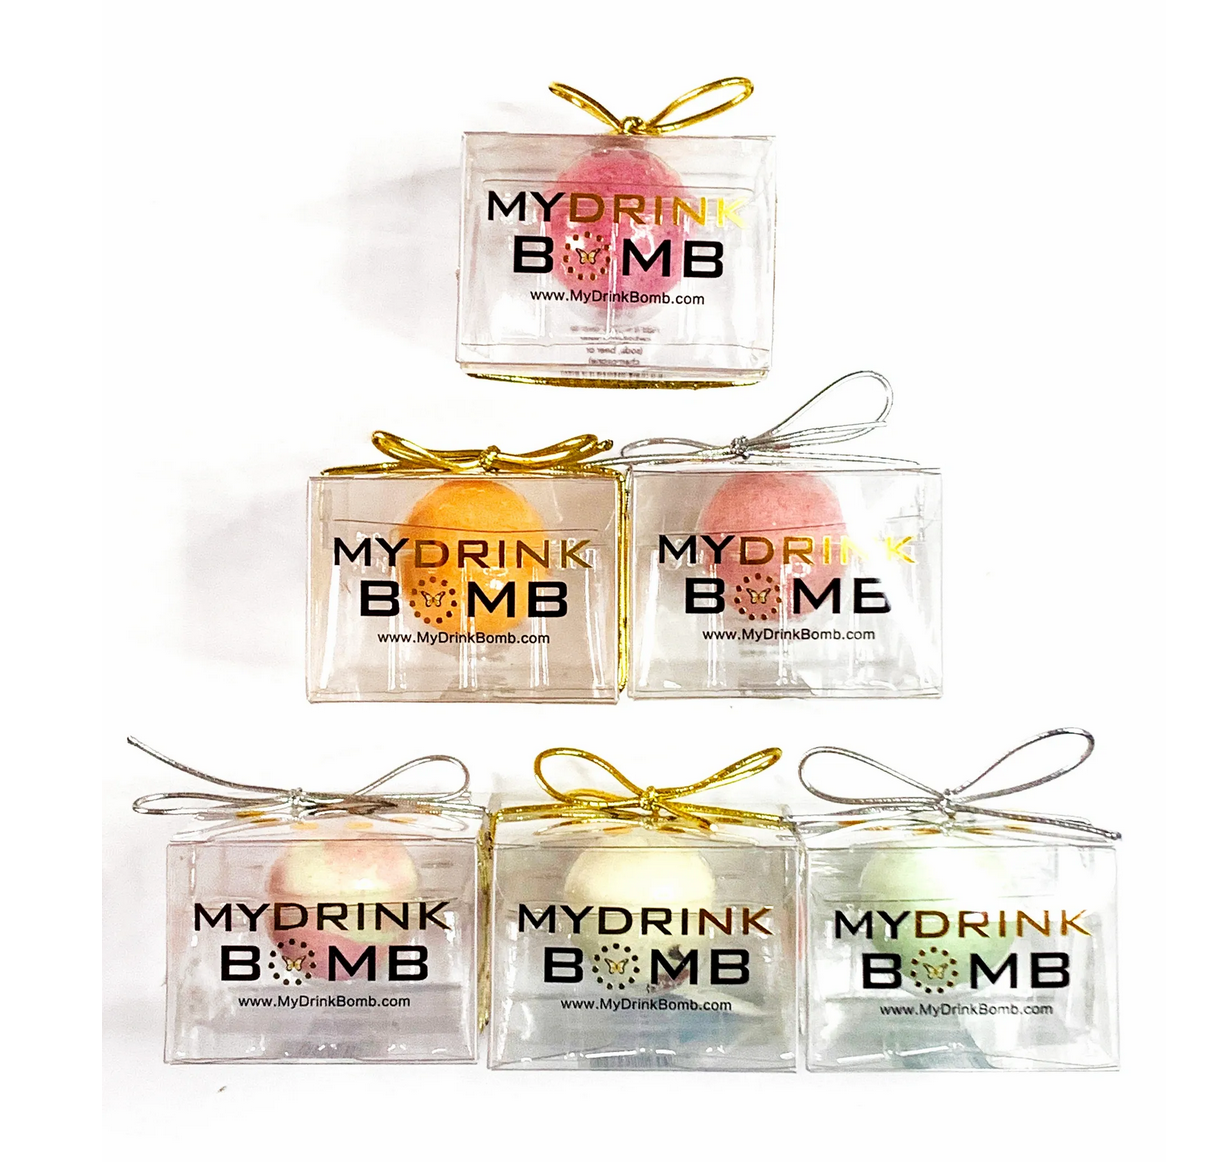 corporate-gifts-party-favors-drink-bomb